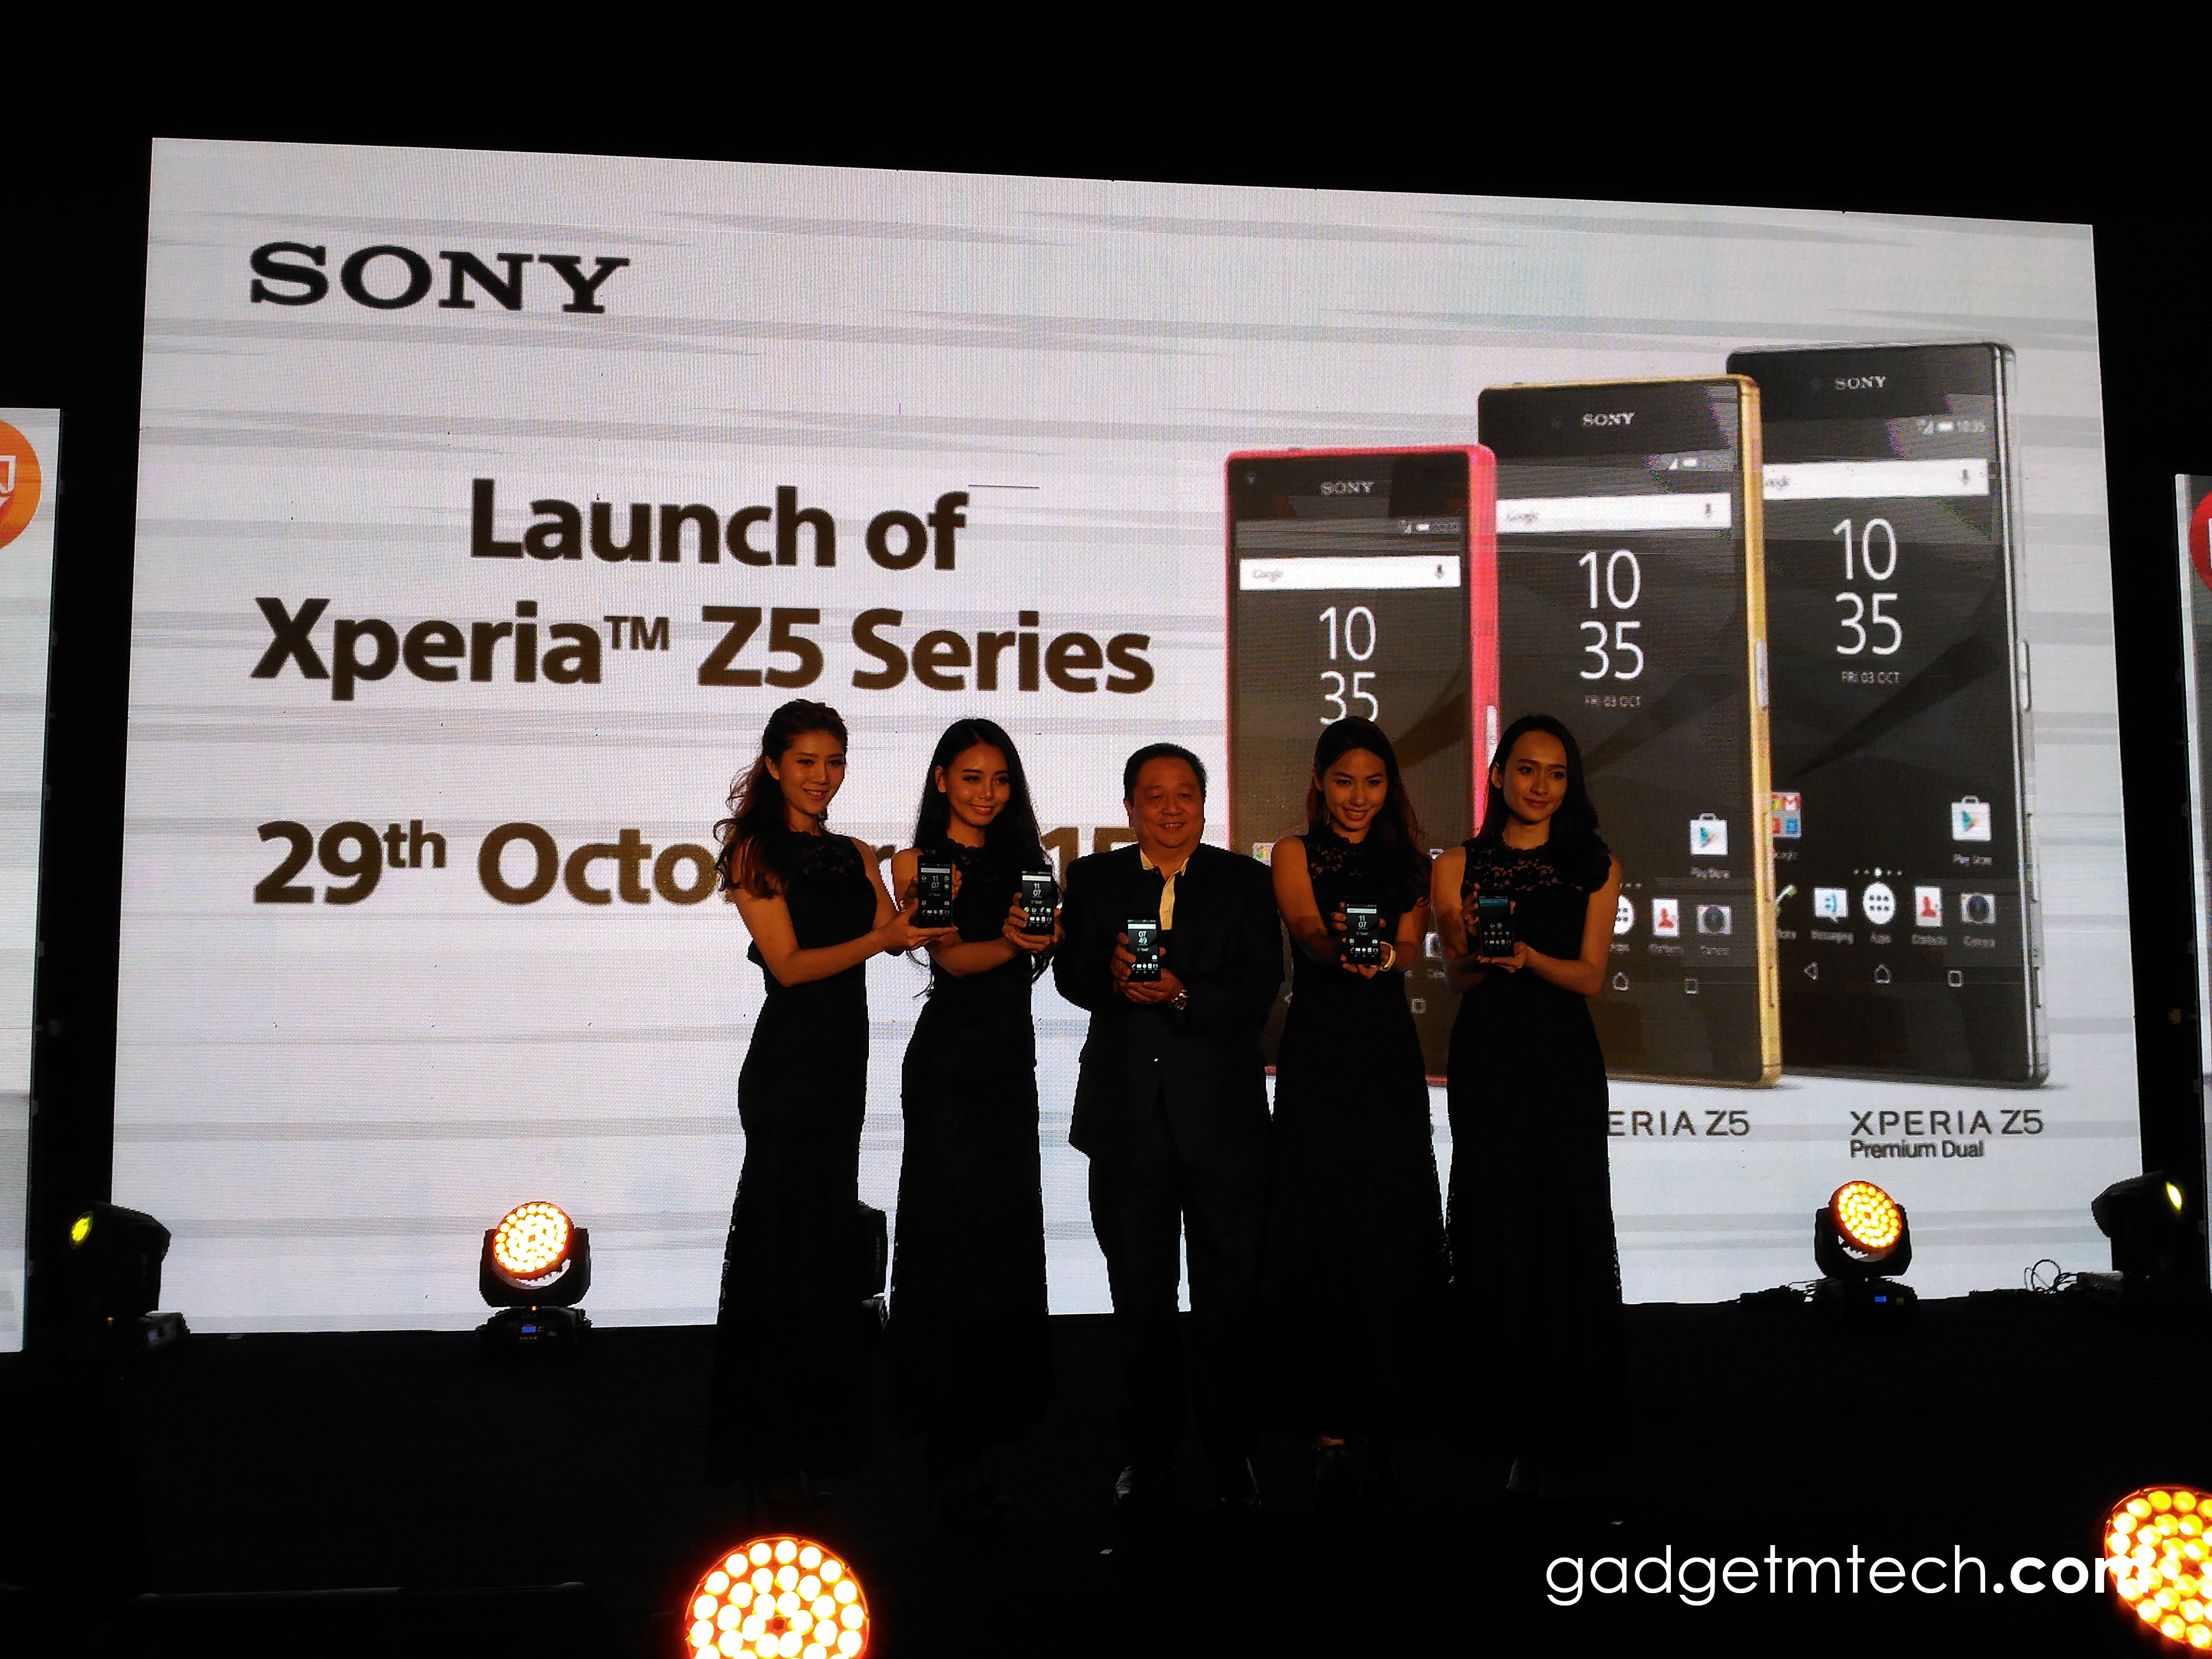 Sony Xperia Z5 Series launched in Malaysia